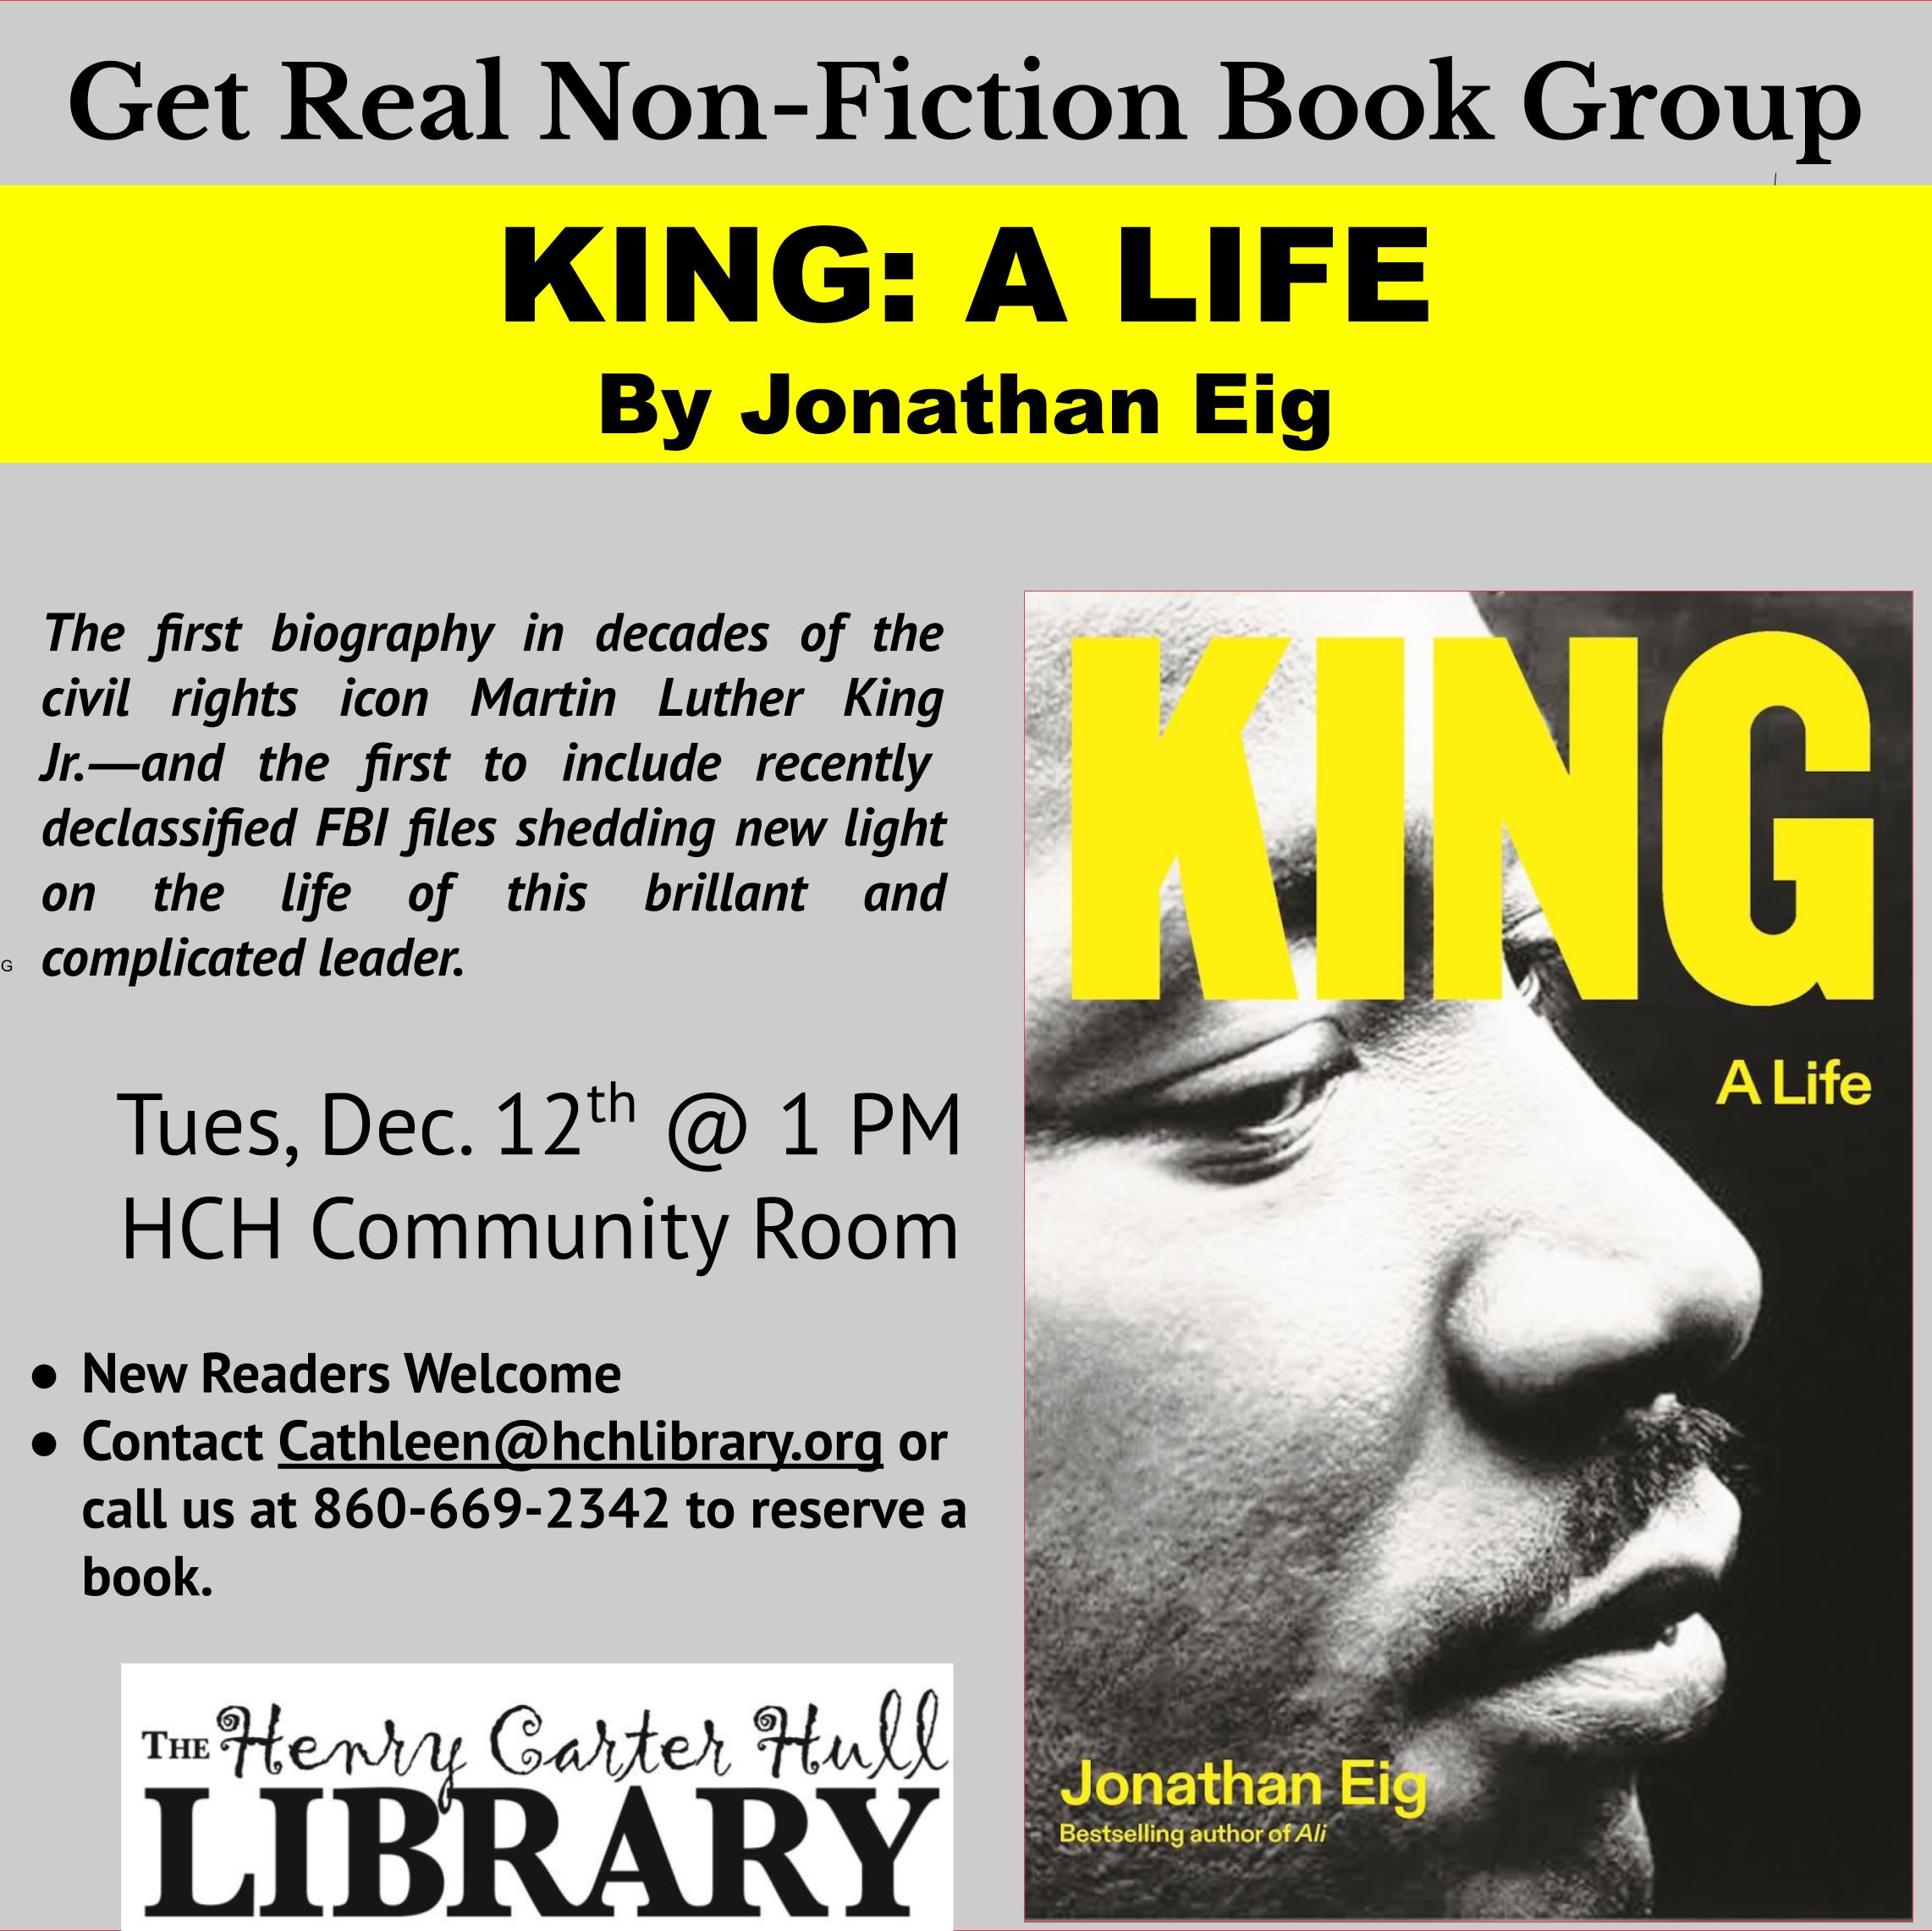 Non-Fiction Reading Group: King A LIfe